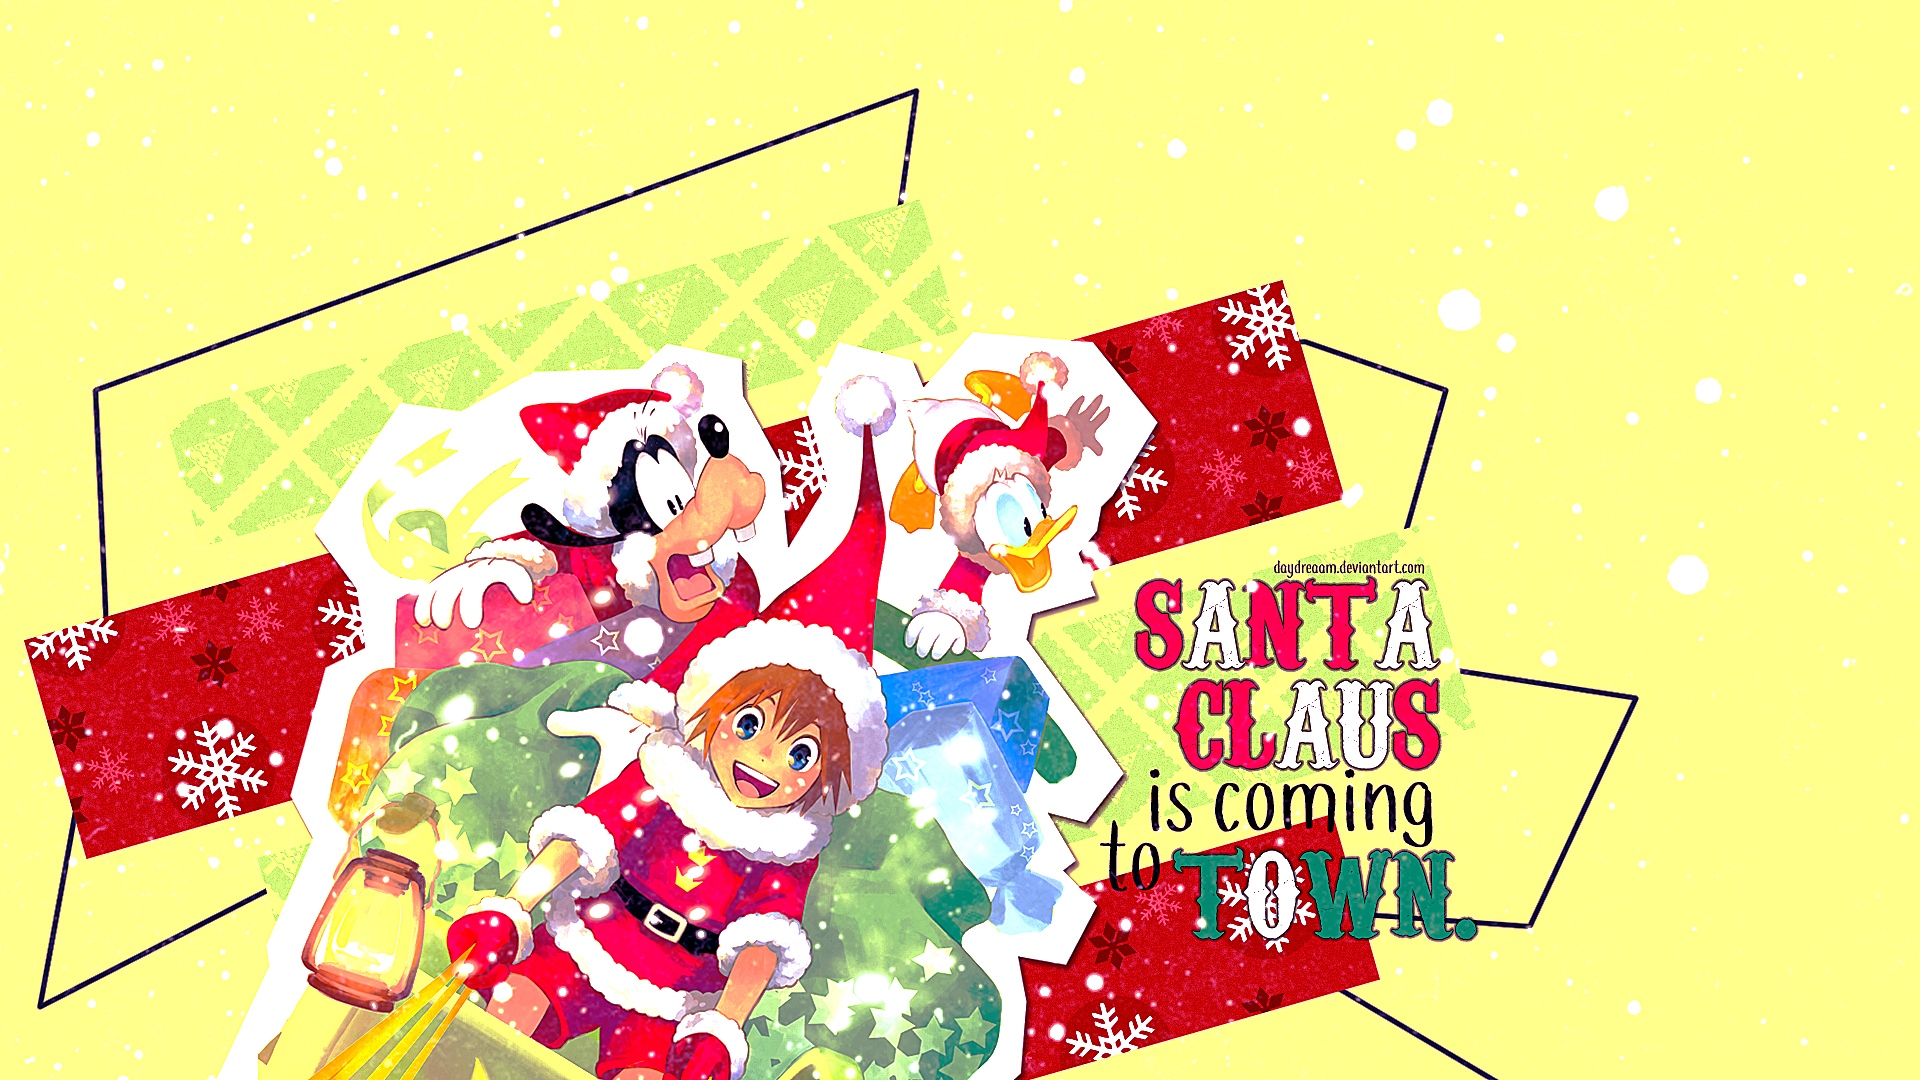 Kingdom Hearts Wallpaper: Santa Claus is Coming to Town